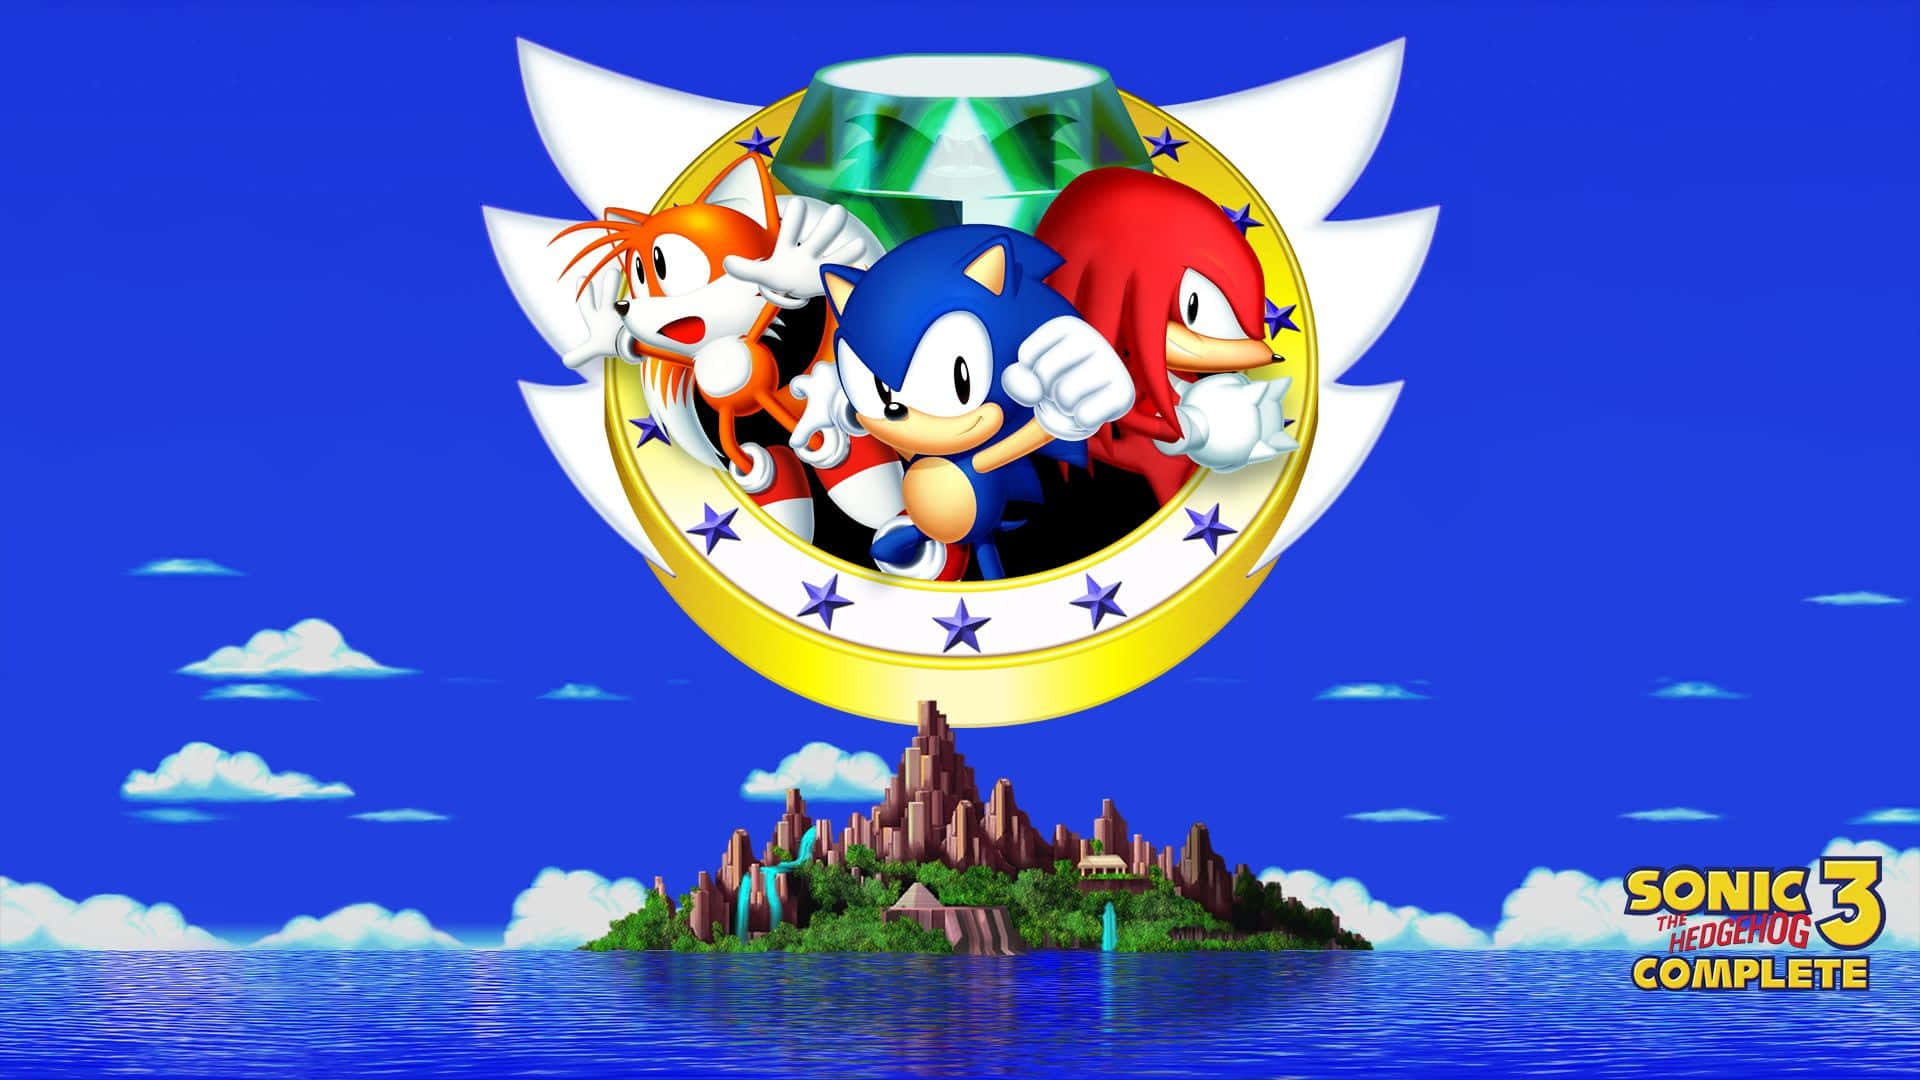 Sonic The Hedgehog Characters - The Ultimate Team Wallpaper